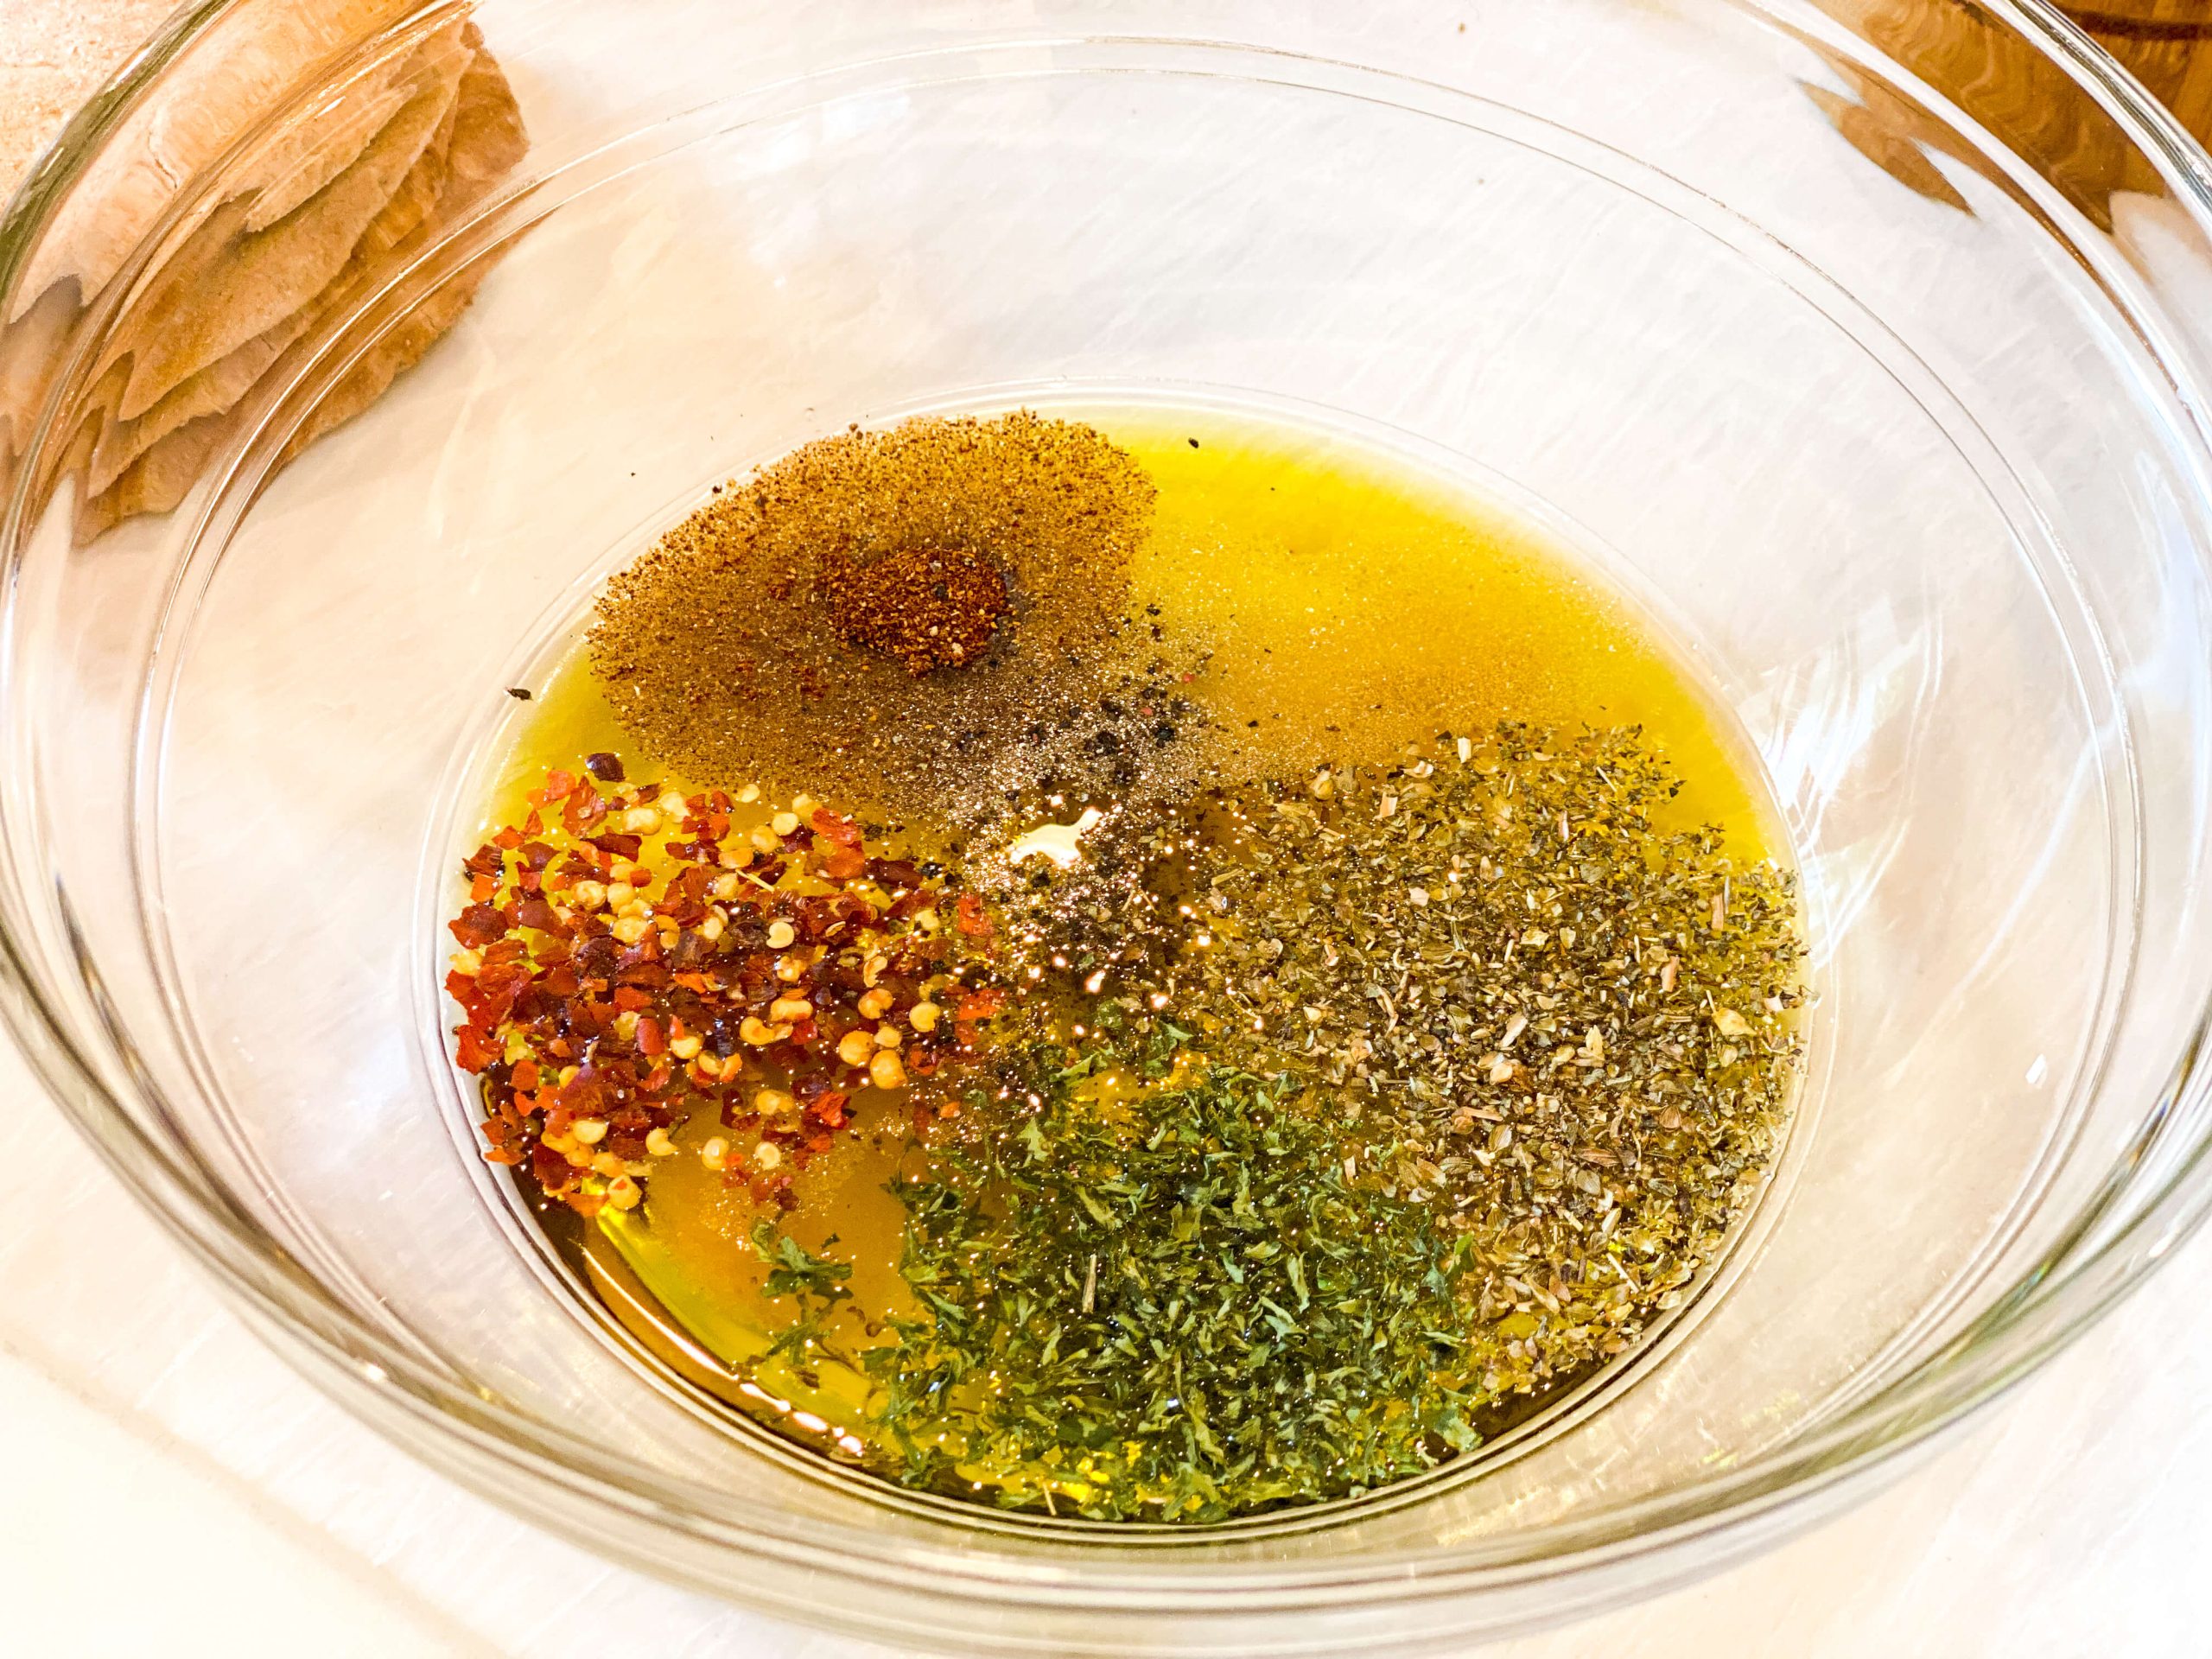 olive oil mixture with herbs and spices